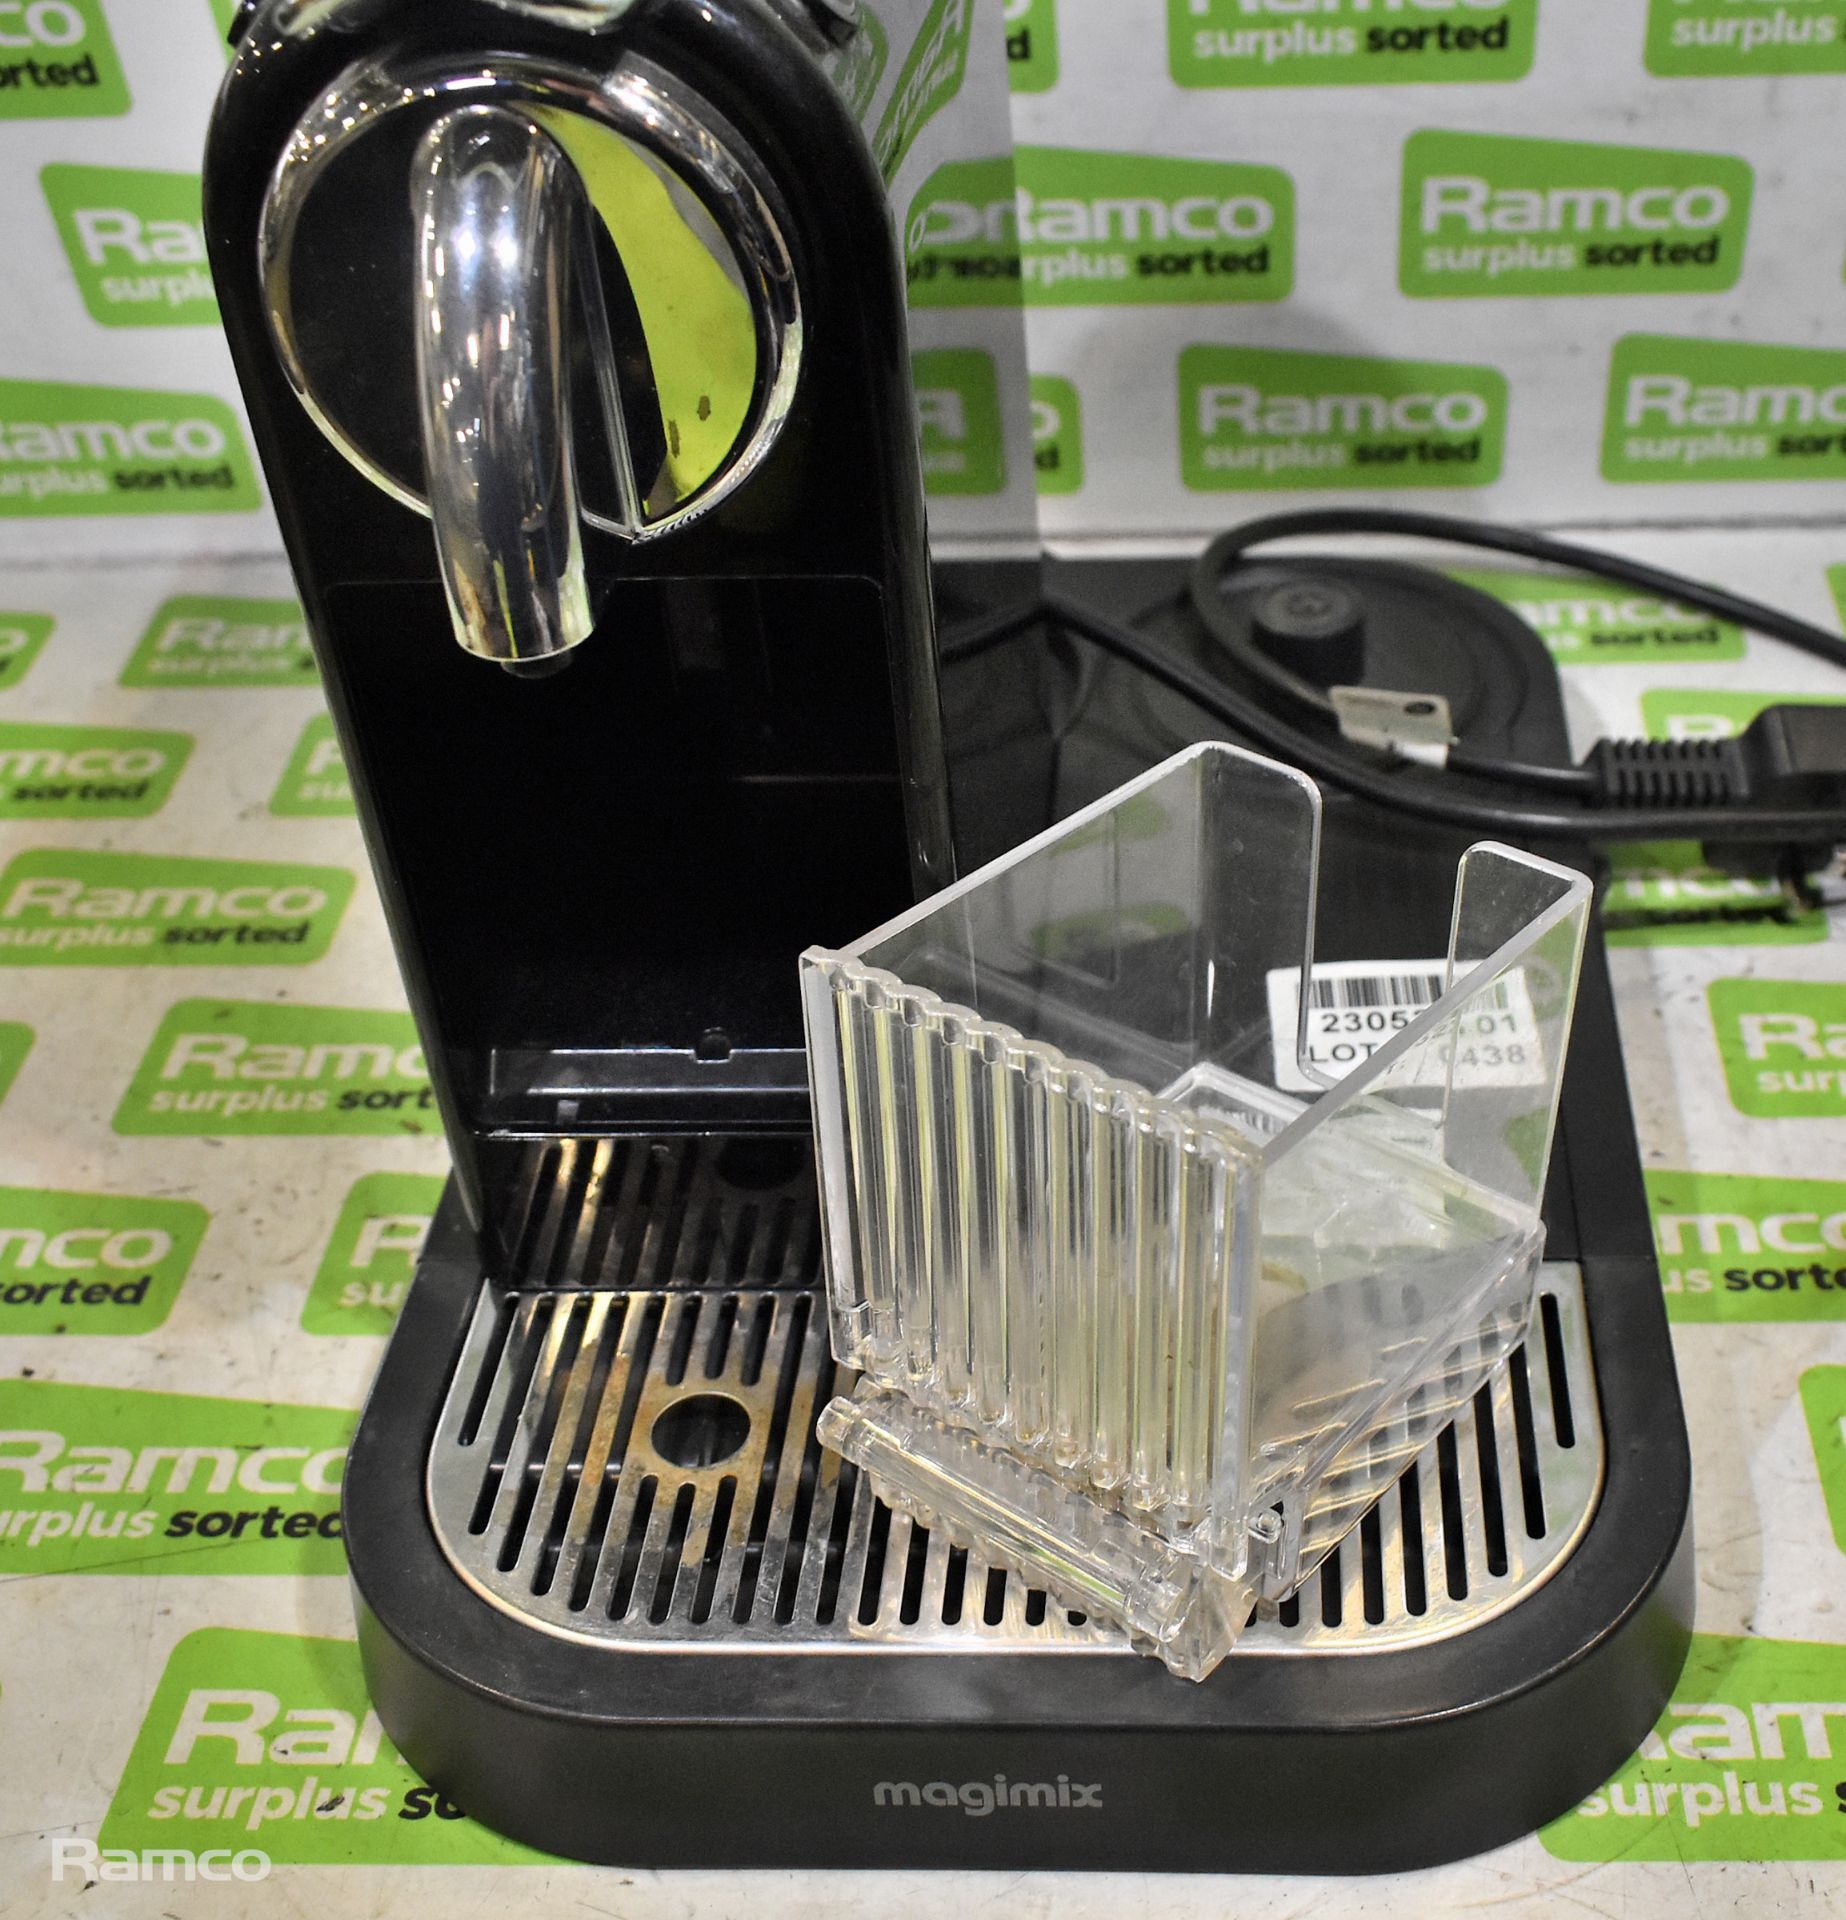 Magimix M190 Milk nespresso coffee machine - NO MILK FROTHER OR WATER TANK - Image 3 of 5